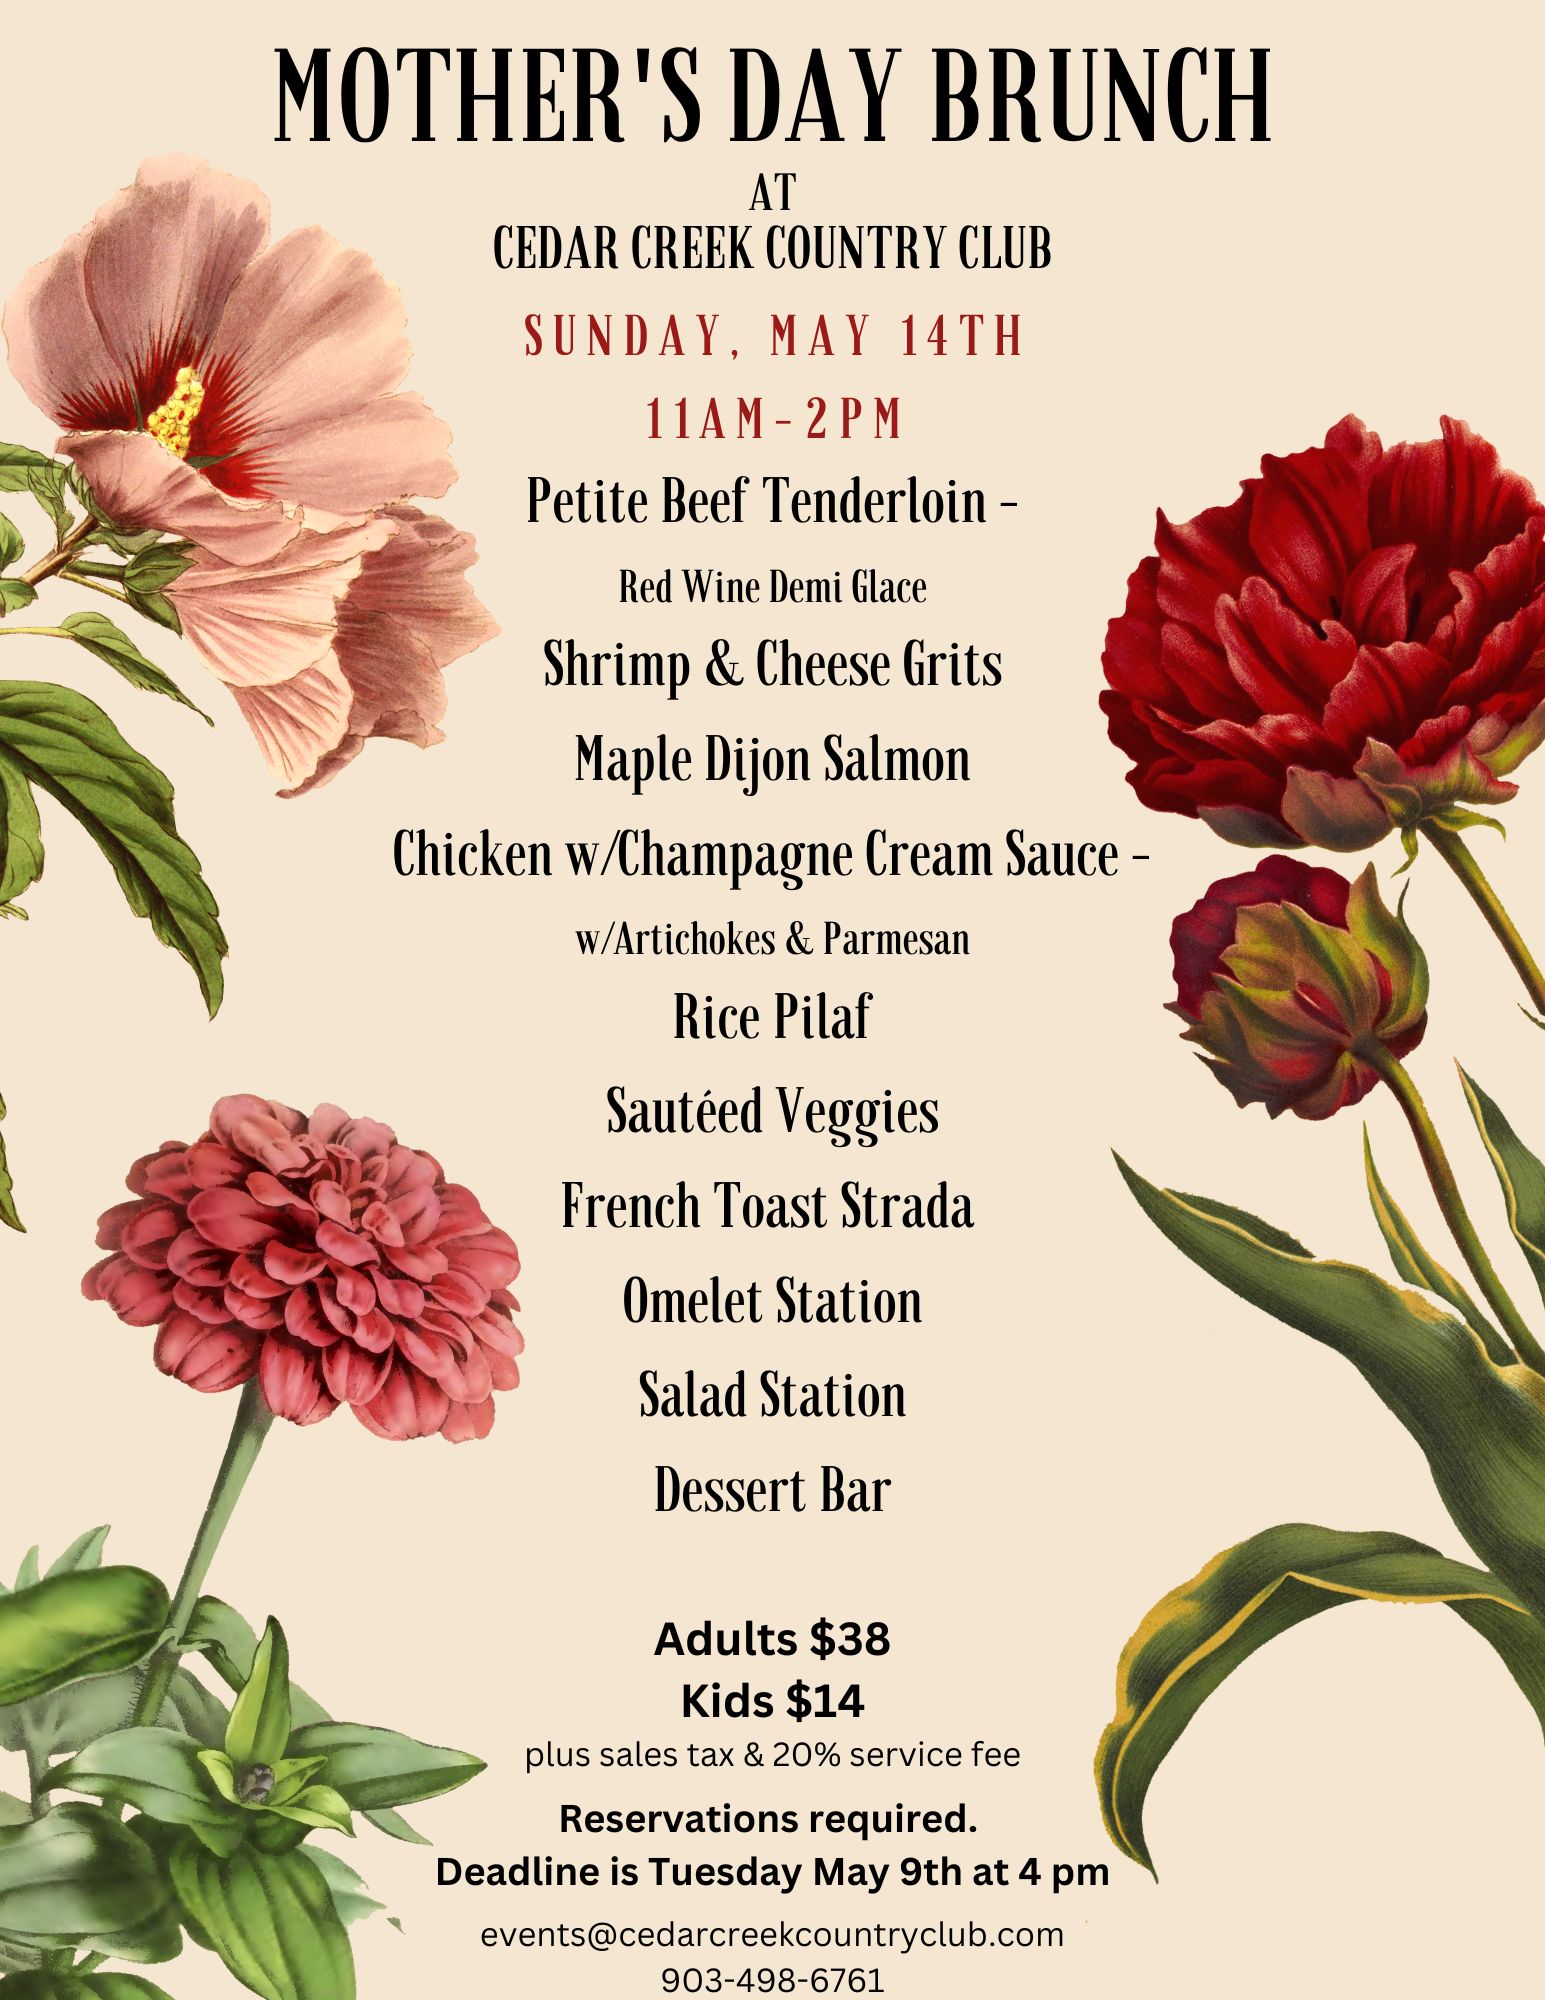 Mothers Day Bruch At Cedar Creek Country Club 1 Mothers Day Brunch CedarCreekLake.Online